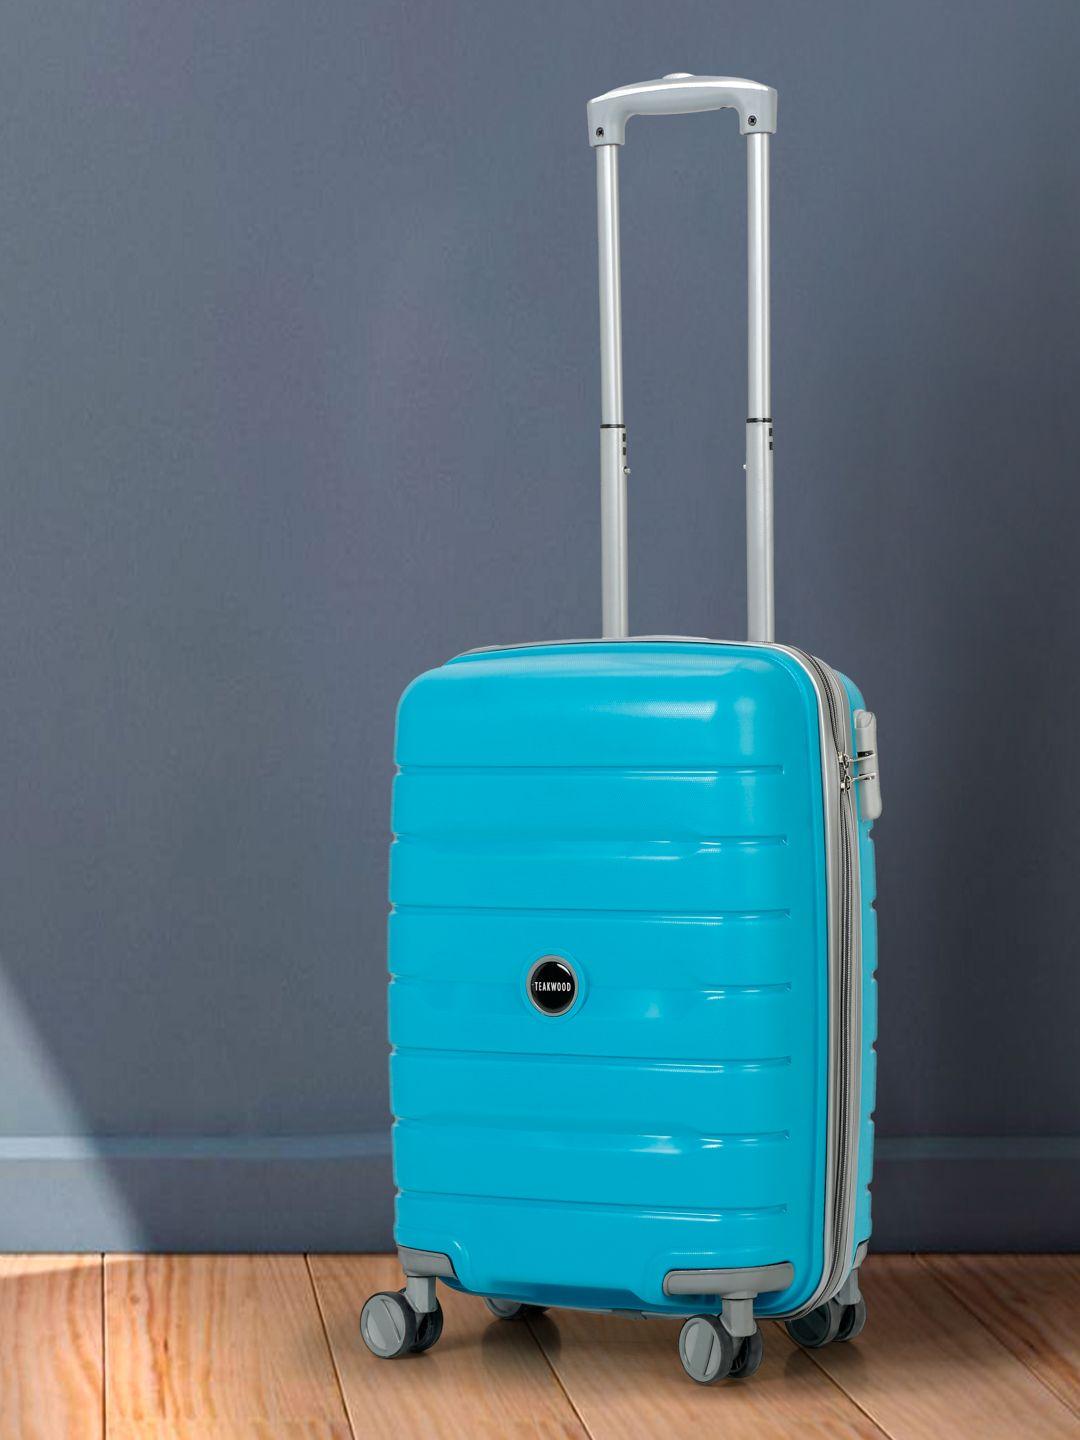 teakwood leathers textured hard-sided cabin trolley suitcase